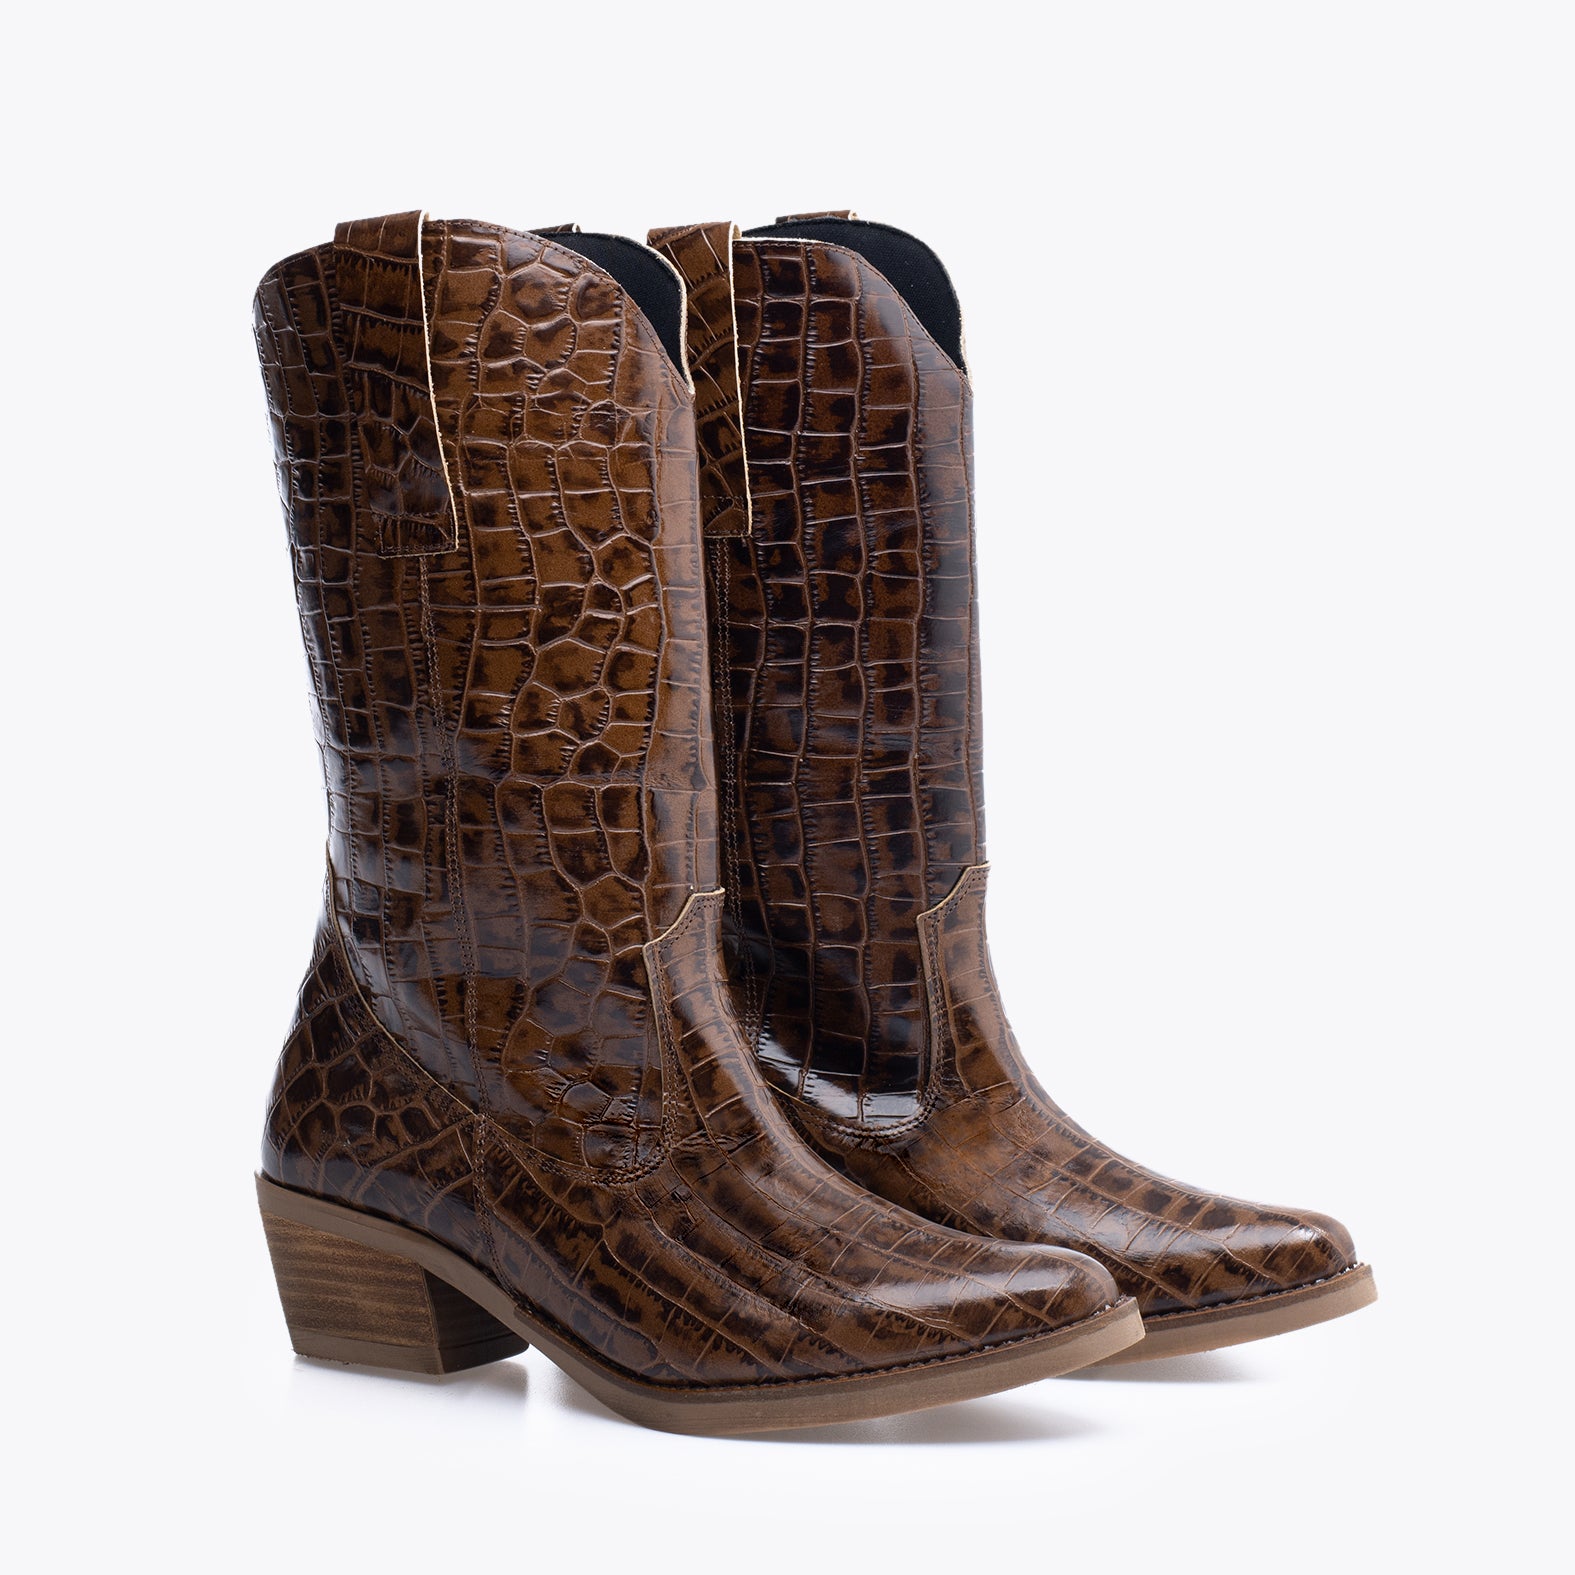 VEGAS BOOTIE - BROWN cowboy style boot